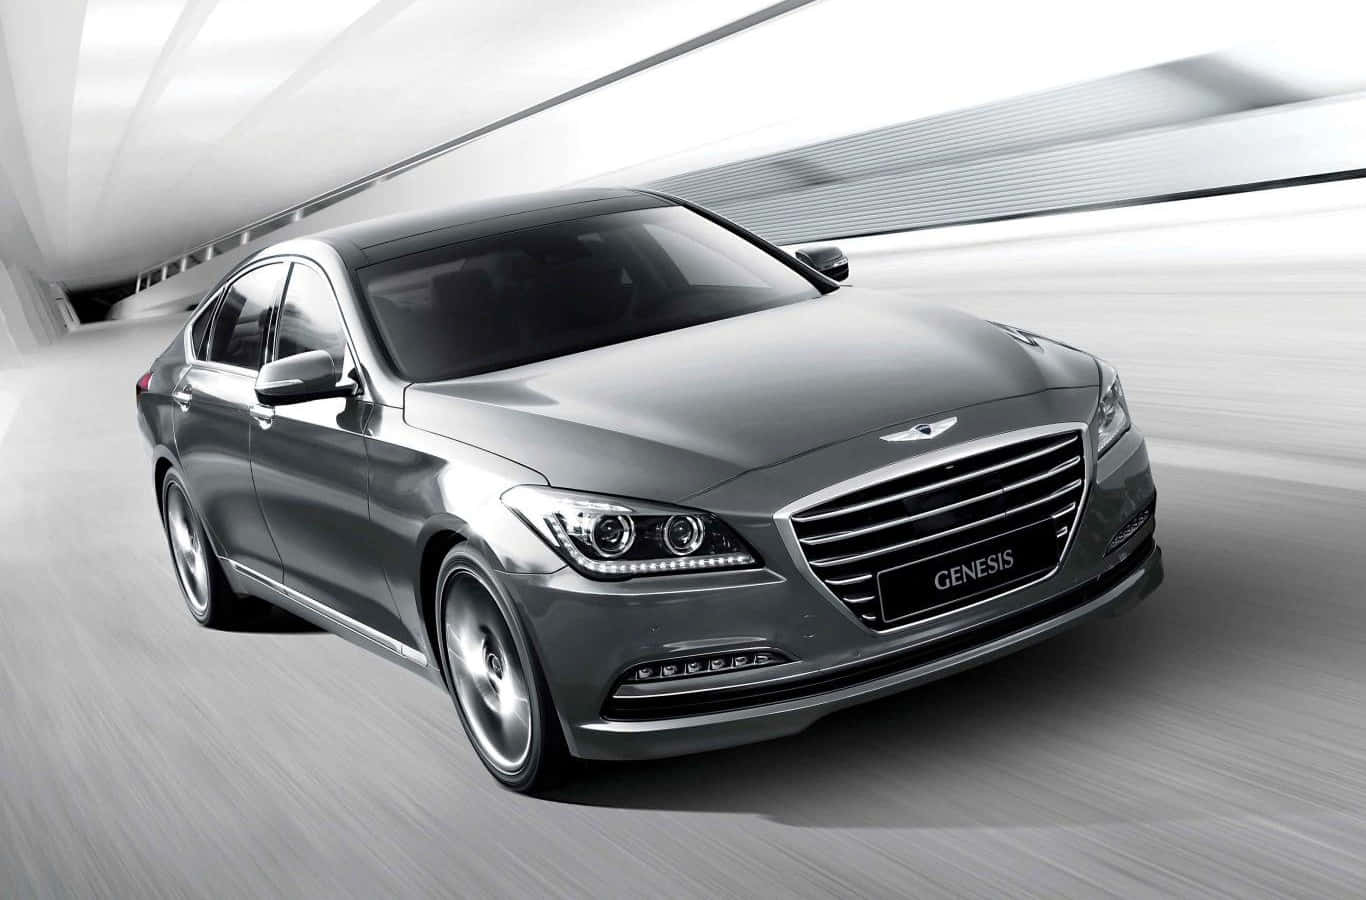 📷  Genesis, the mid-size luxury sedan made for long-distance driving